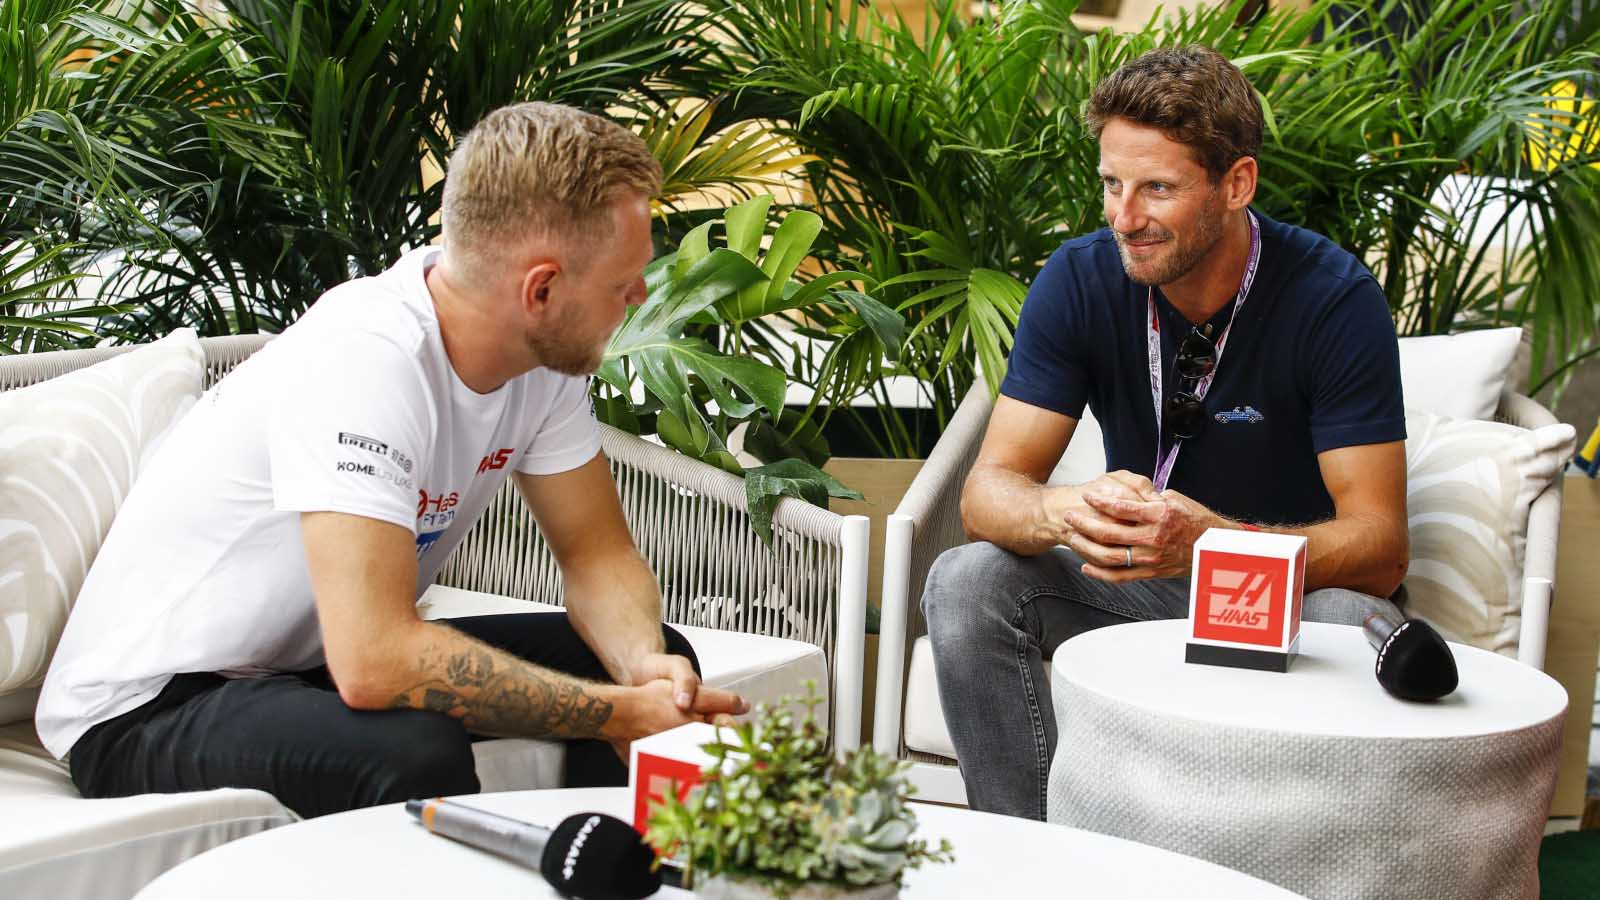 Kevin Magnussen and Romain Grosjean chat together. Miami May 2022.